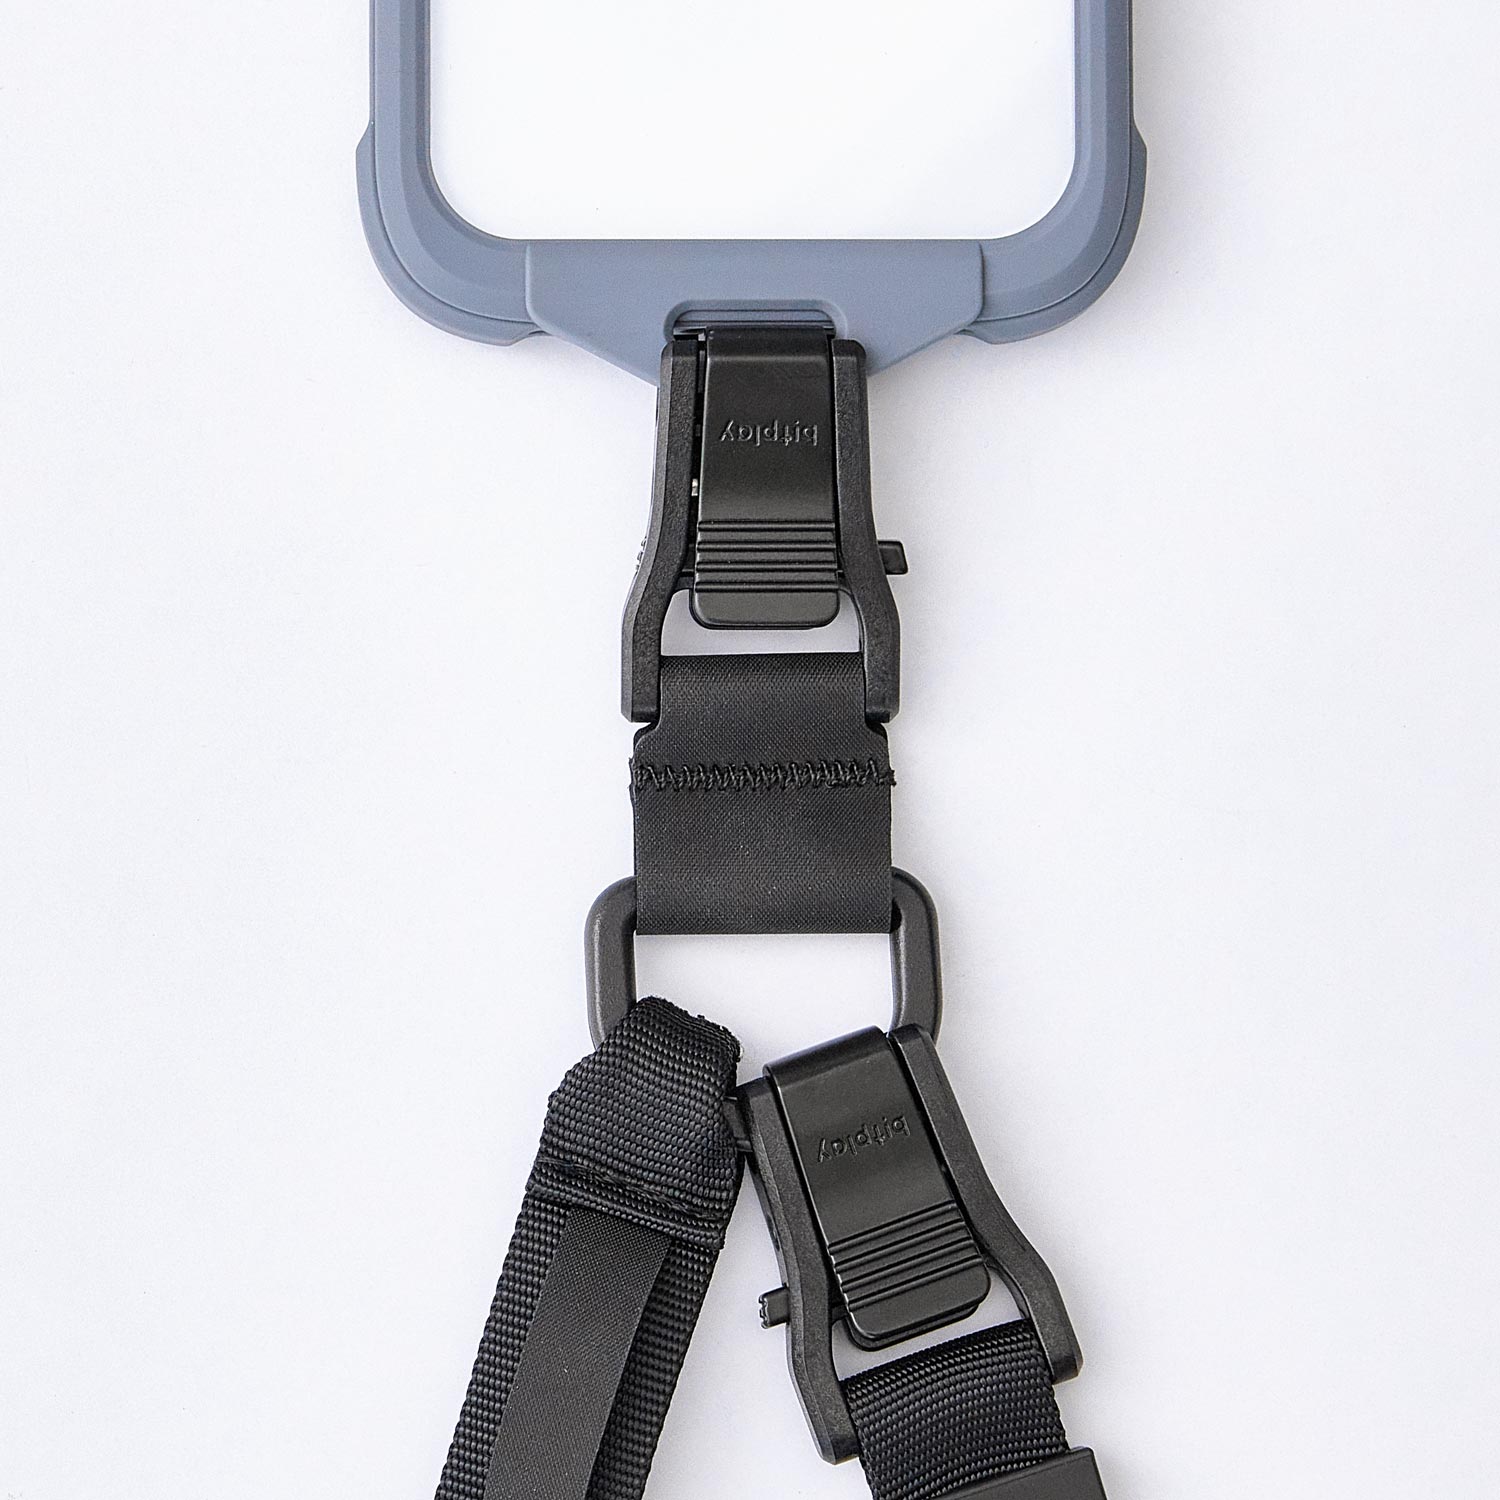 Multi-Use Strap - Army Green  (Strap Adapter included）